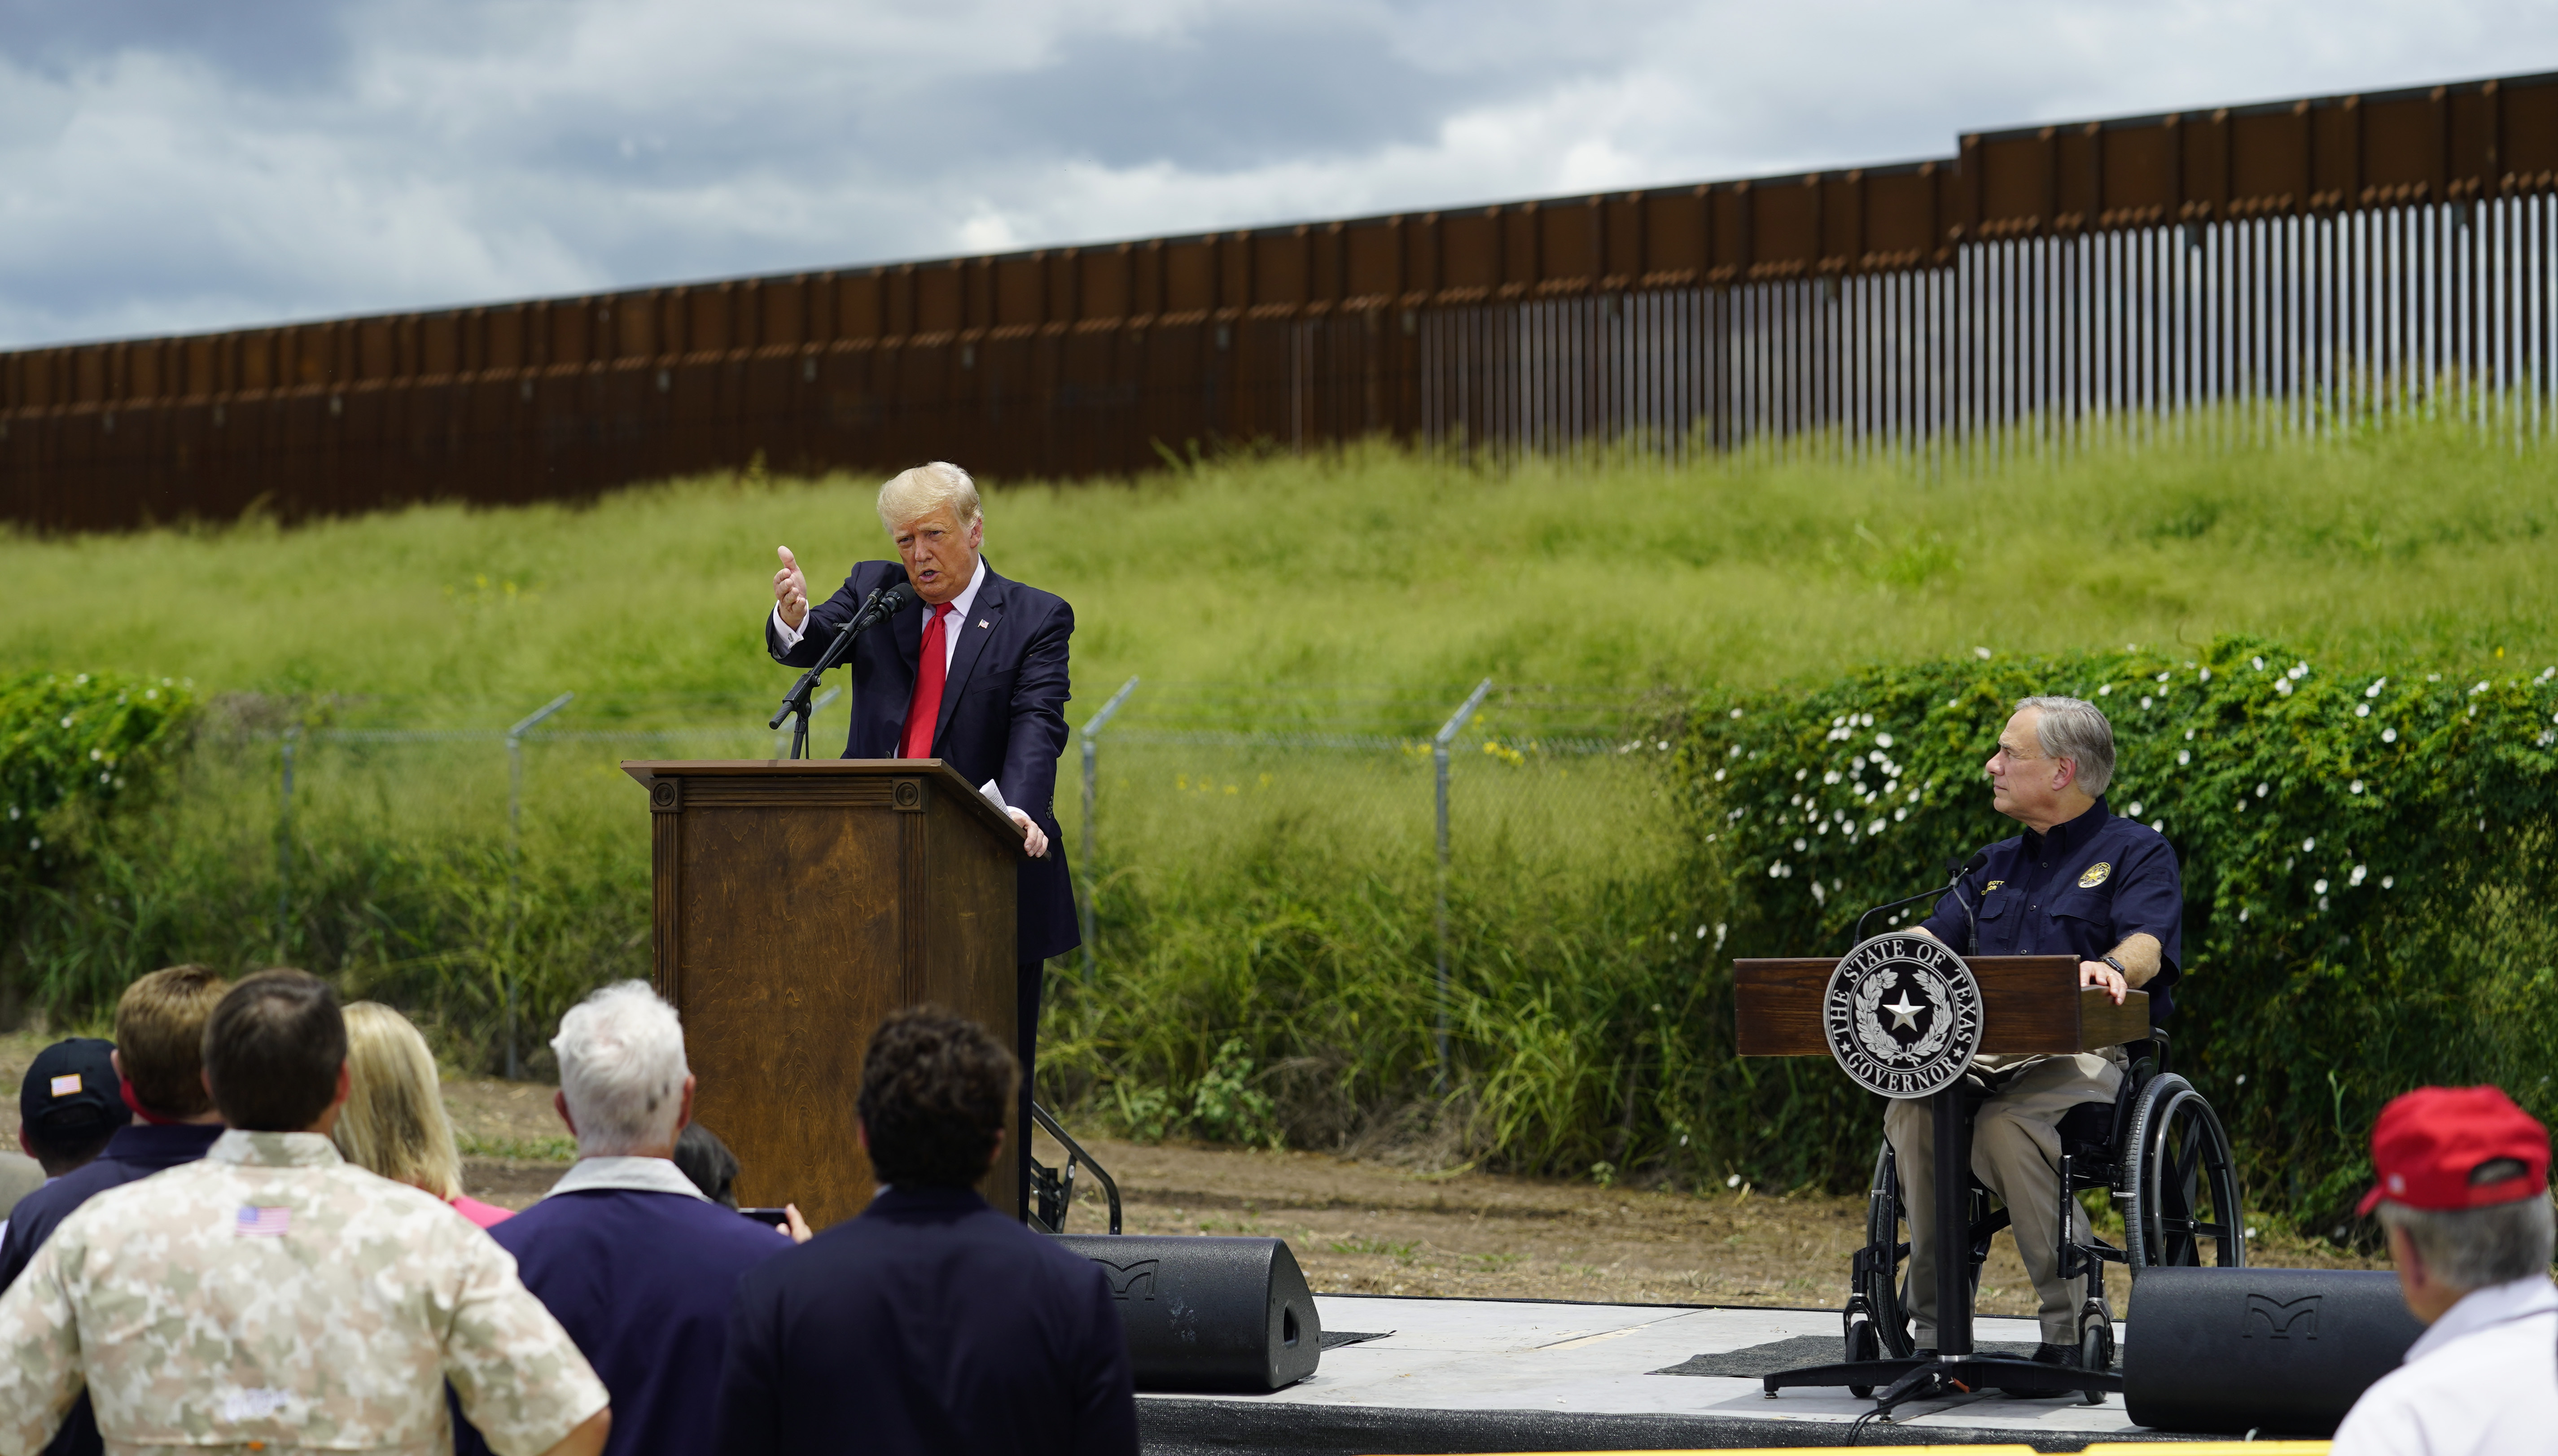 Texas raised $54 million for border wall—almost all from one billionaire